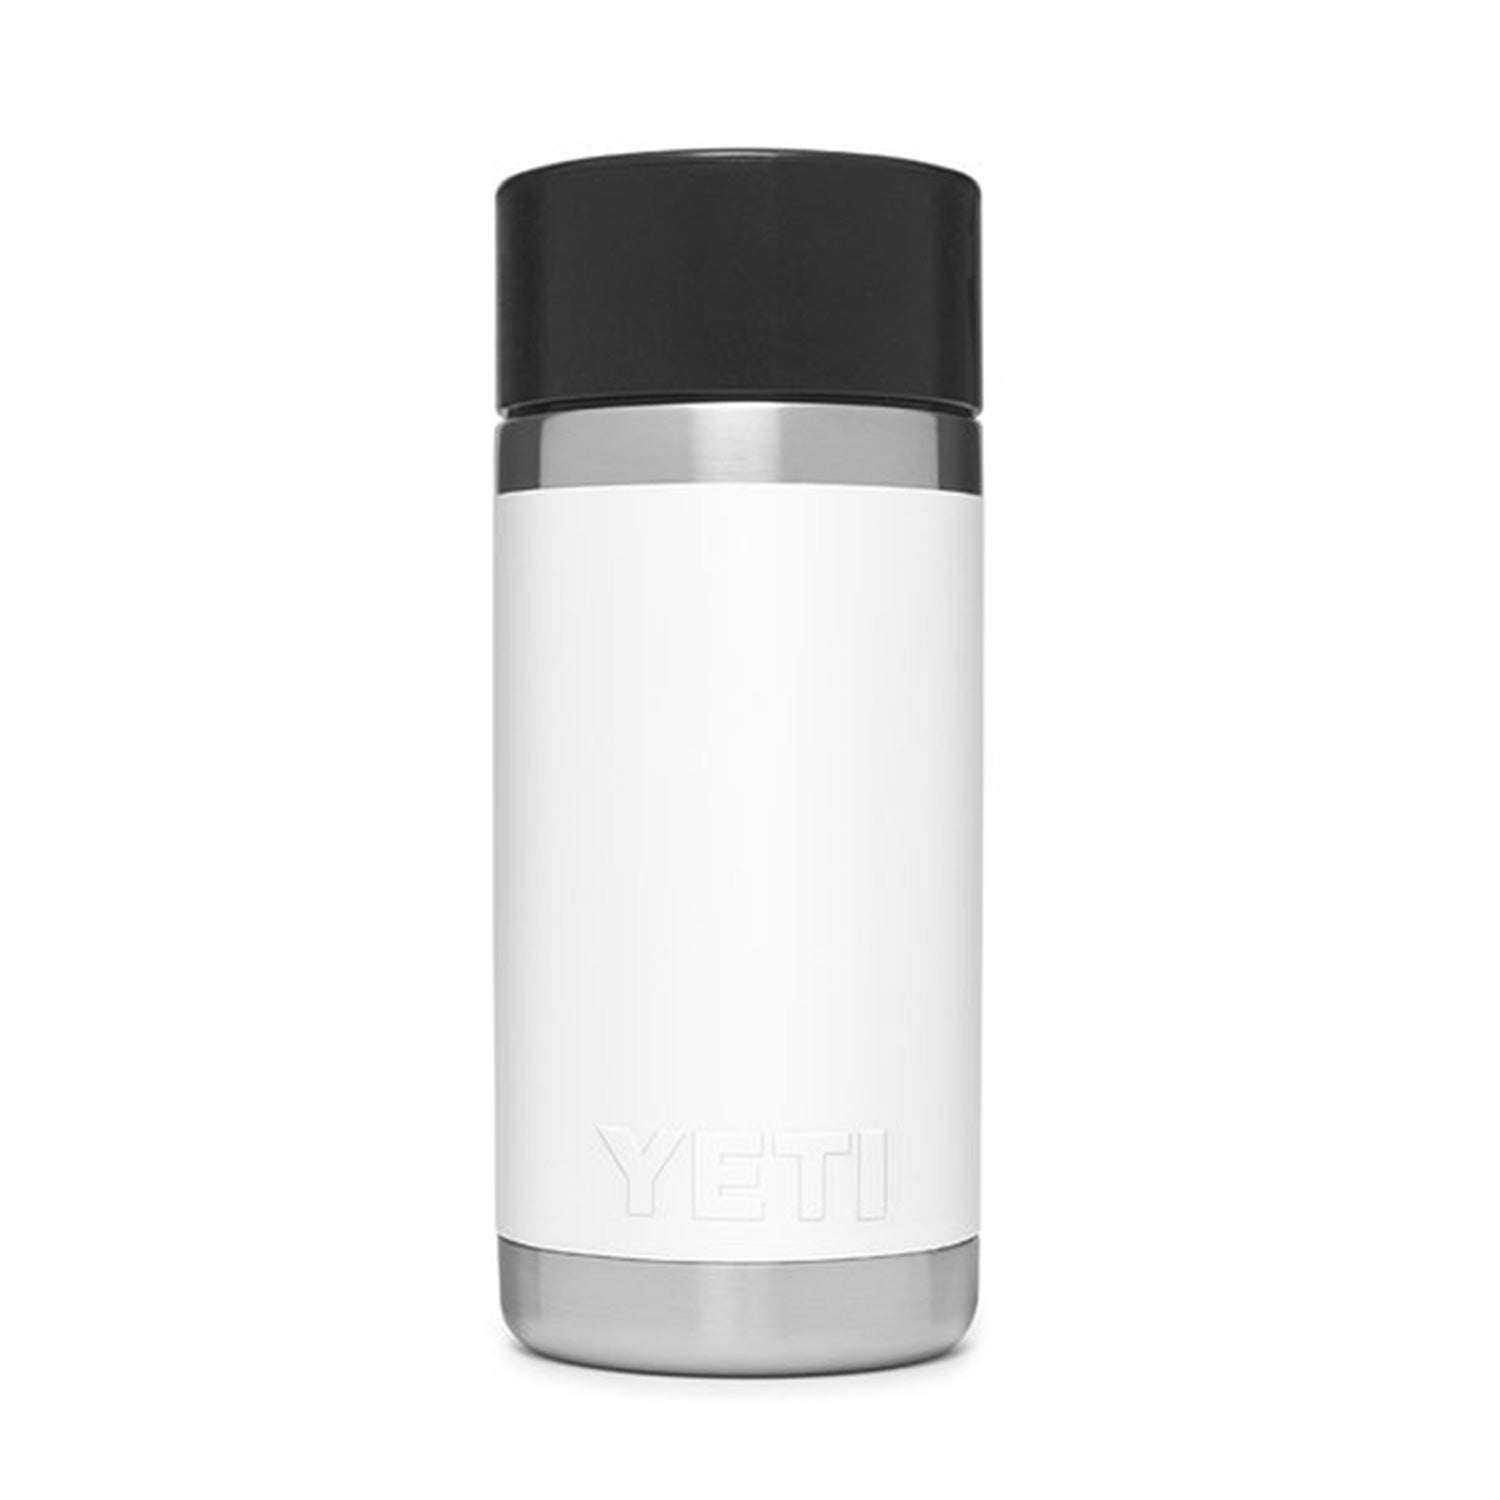 YETI - Rambler 12 oz. Bottle with Hotshot Cap This is newness all around.  The new 12 oz bottle holds just the right amount of caffeine for a quick  hit in the